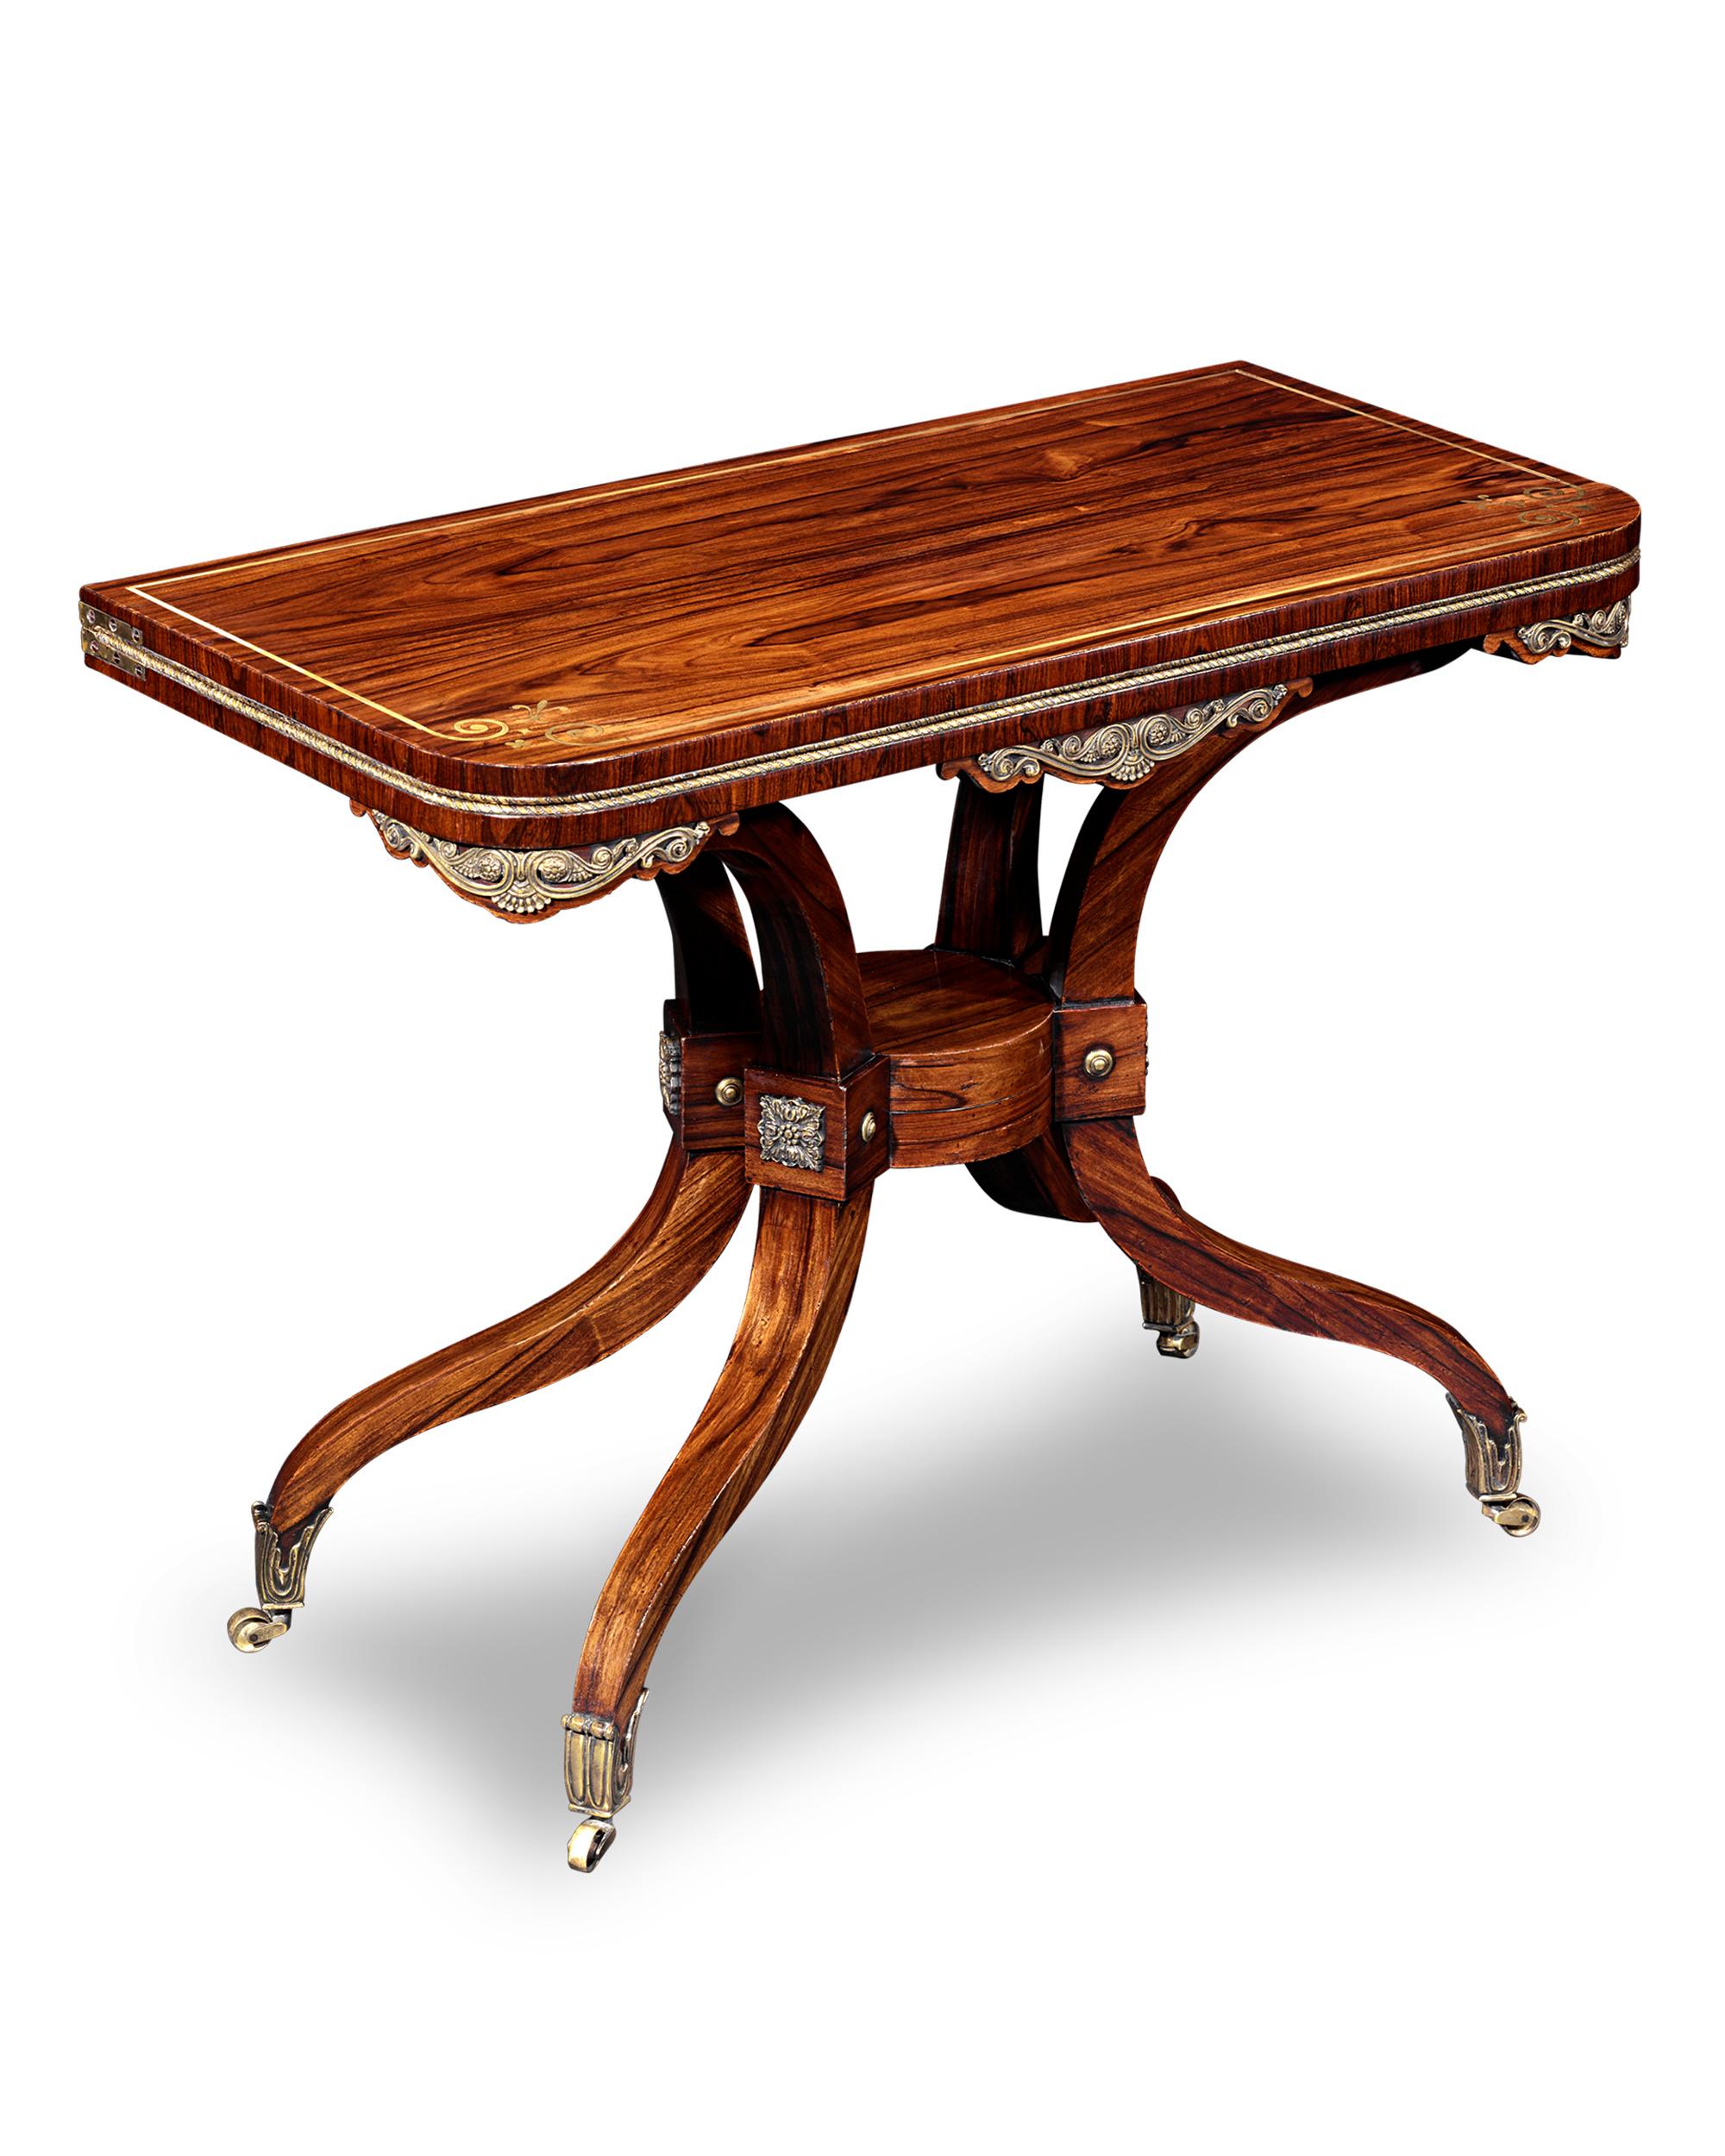 Regency-Period Rosewood Card Tables In Excellent Condition For Sale In New Orleans, LA